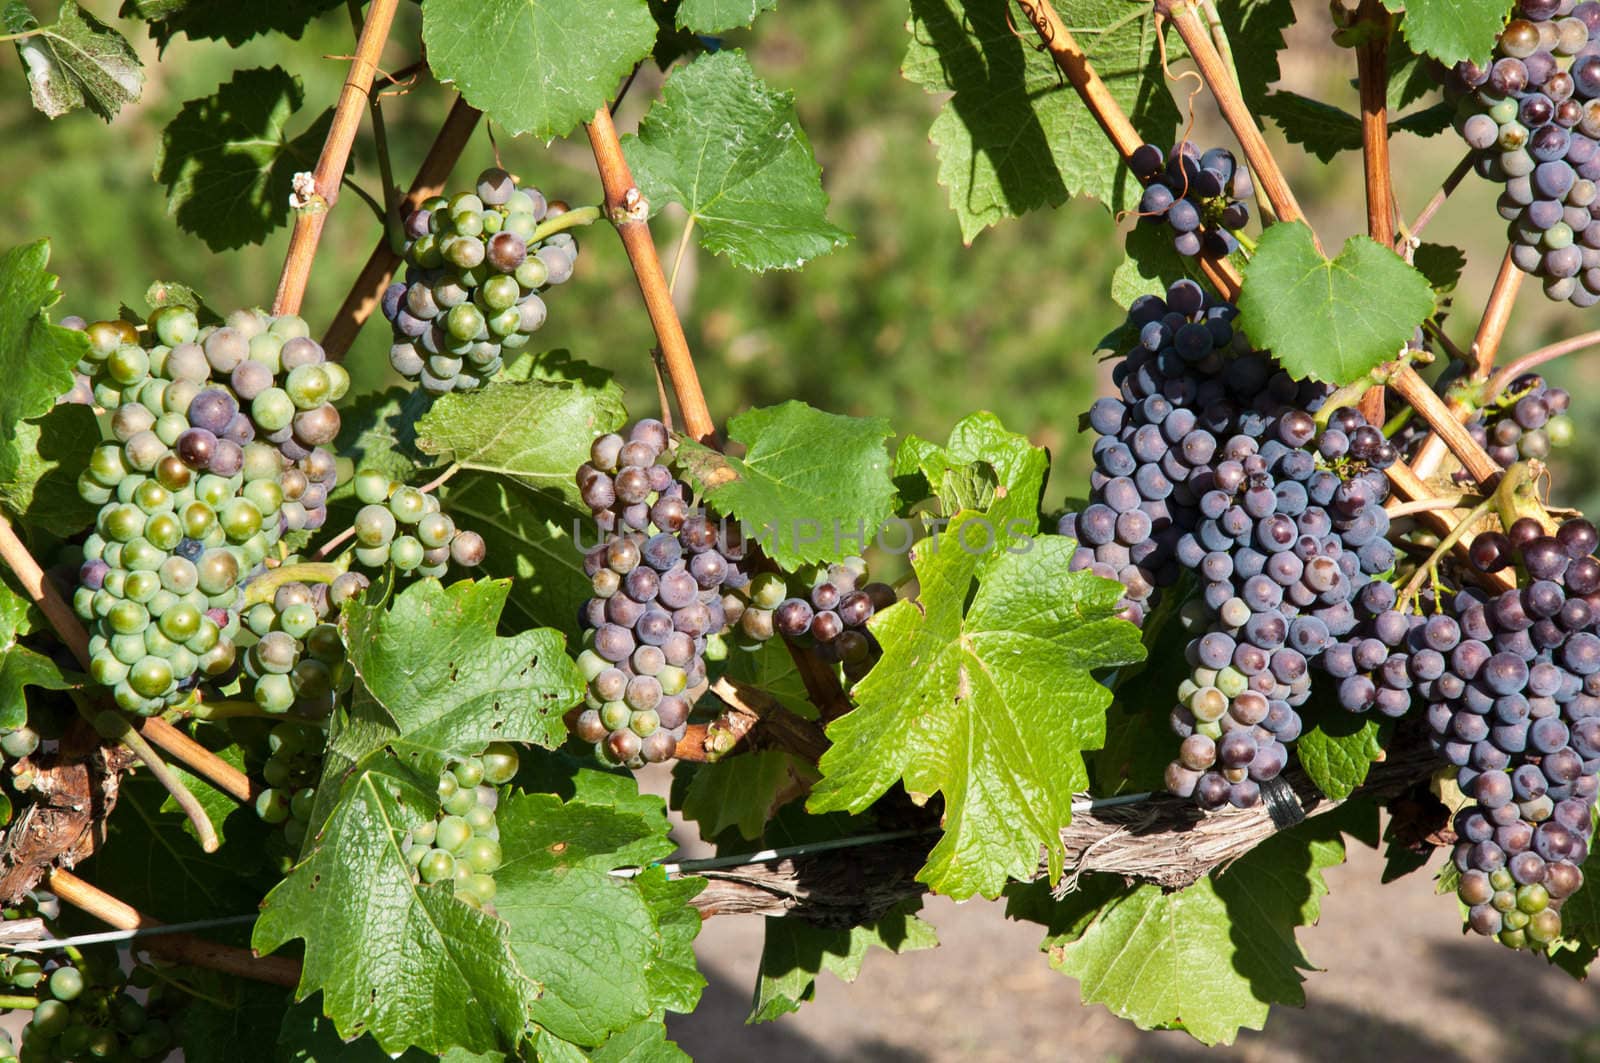 Closeup of mixed red and green grape bunches still hanging on the vine at a vineyard.